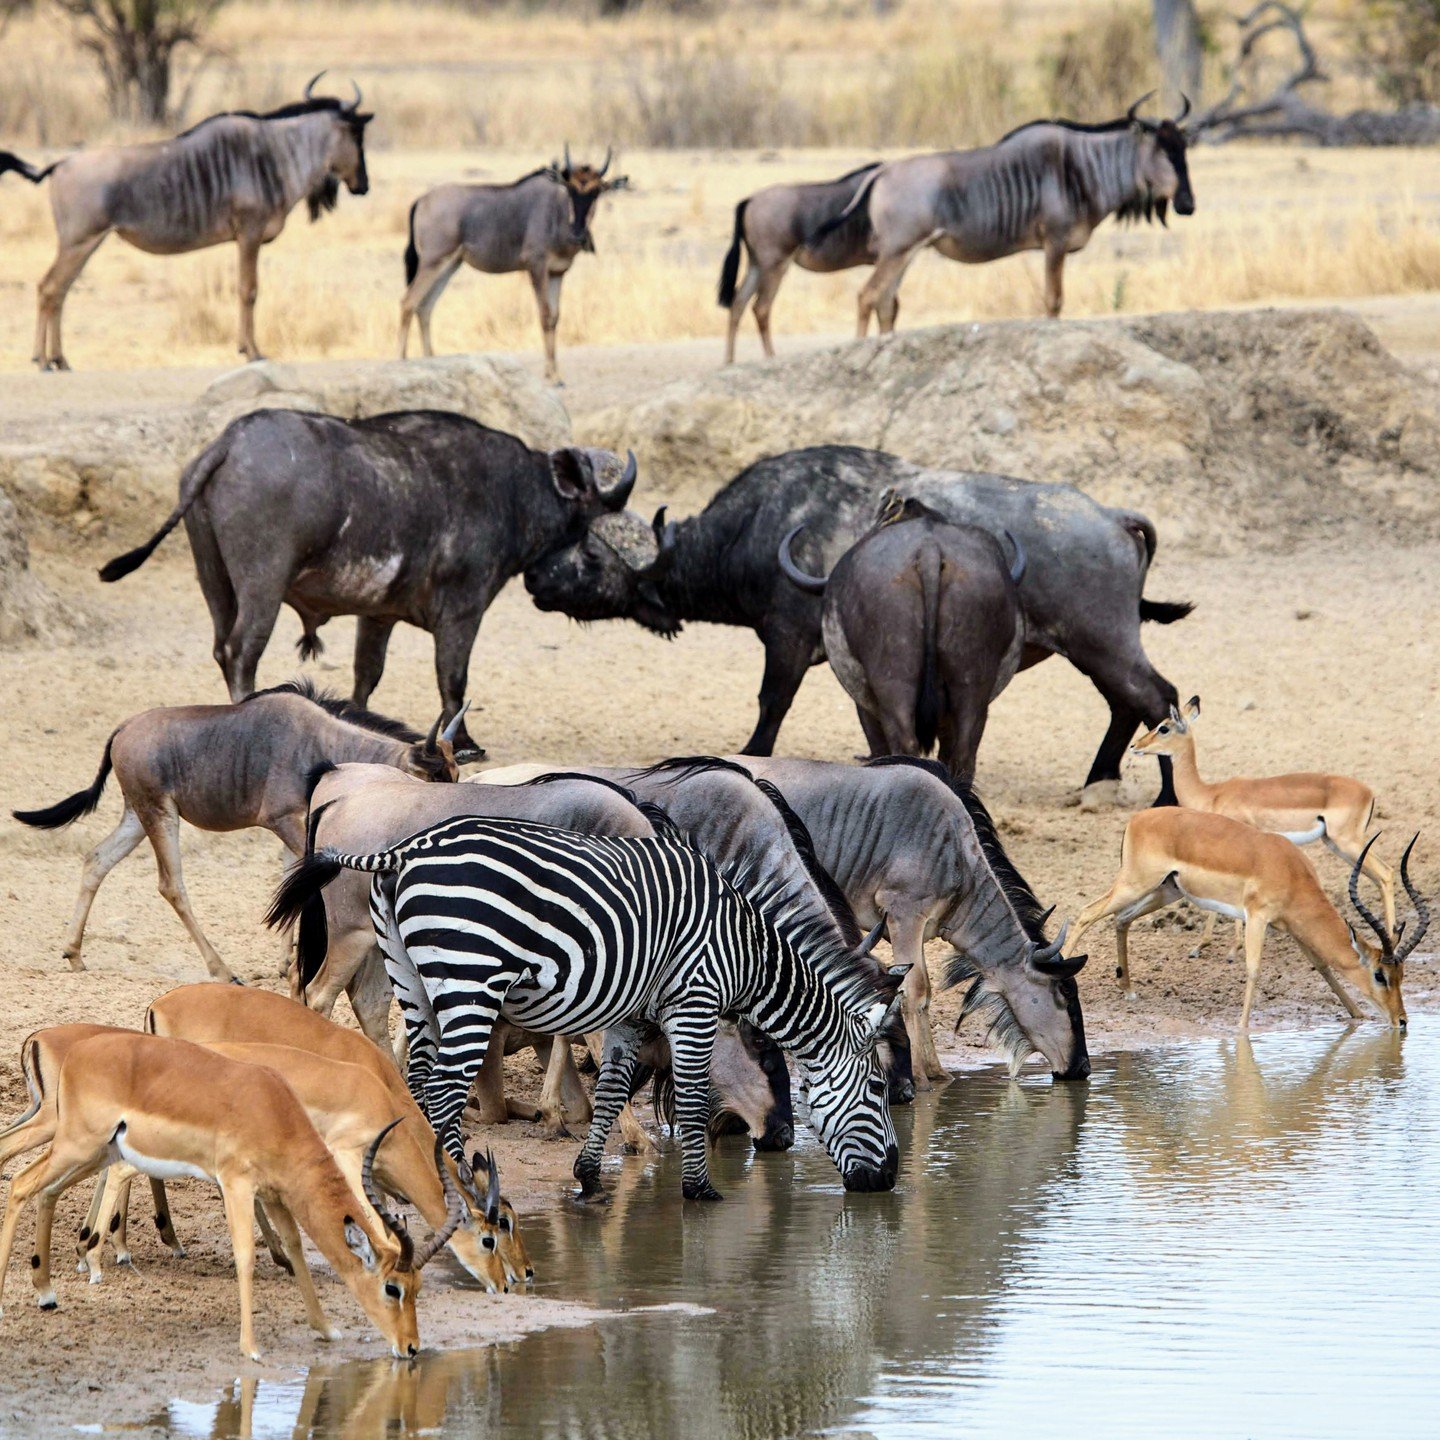 A popular park with day trip visitors from Dar es Salaam, Mikumi was gazetted as a national park in 1964. With its wide open grasslands and the Mikumi flood plain, the national park supports wildlife including elephant, buffalo, lion, leopard, hippo,